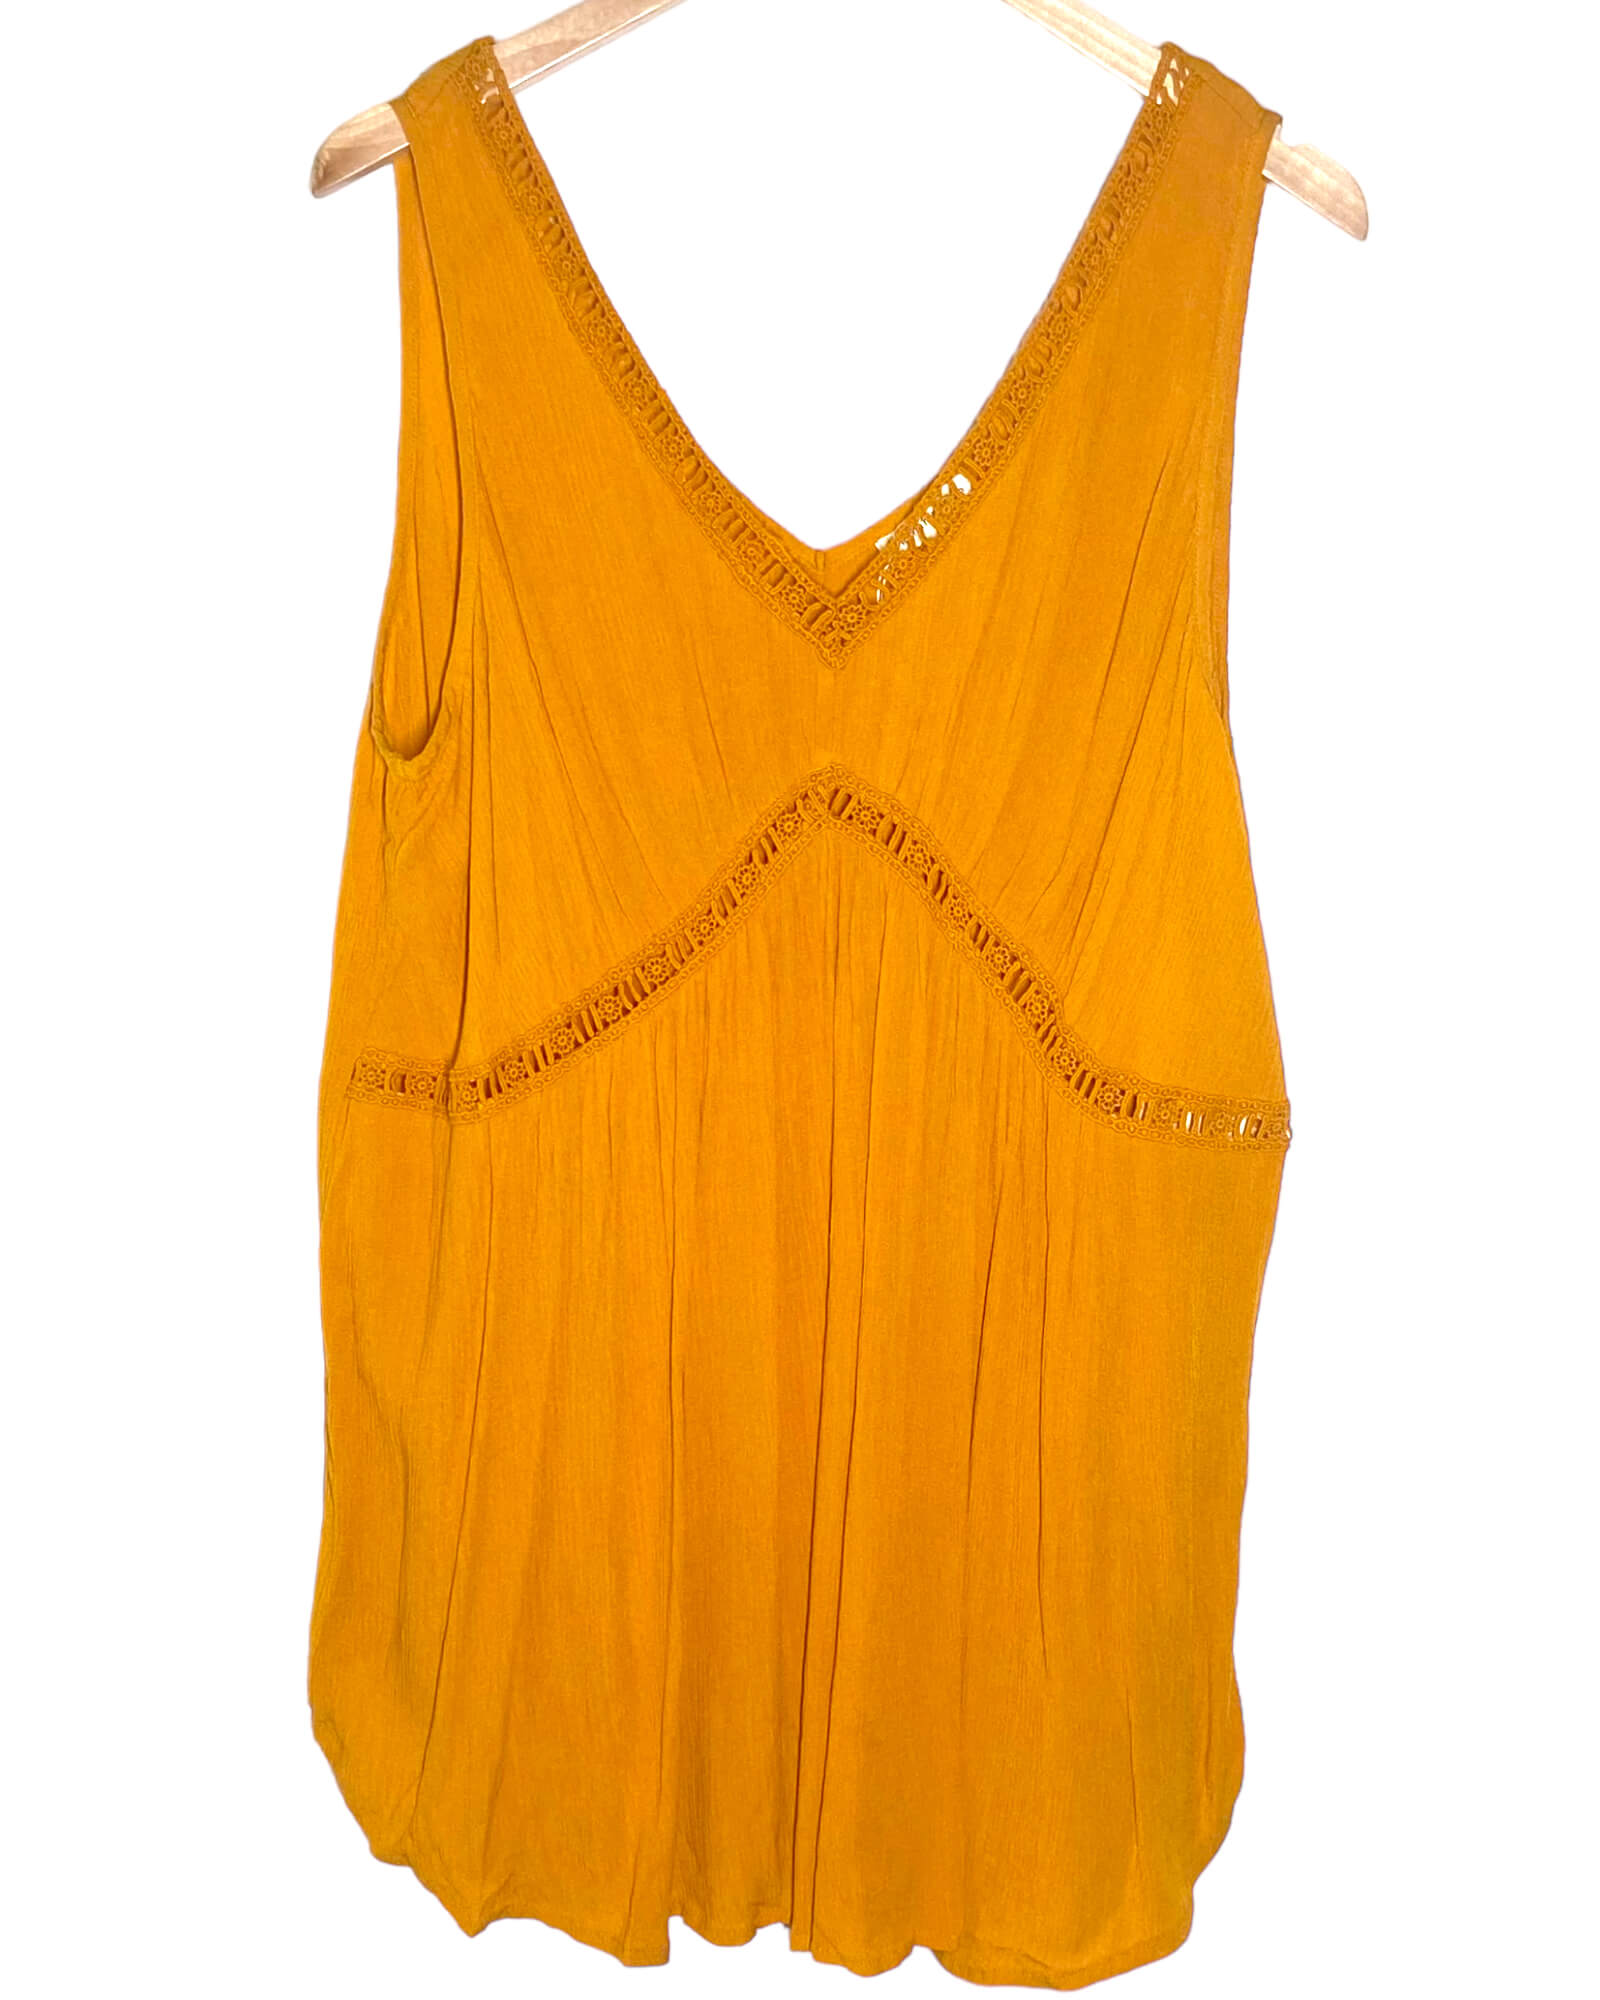  Bright Spring LOVE ON A HANGER gold yellow embroidered lace sleeveless top